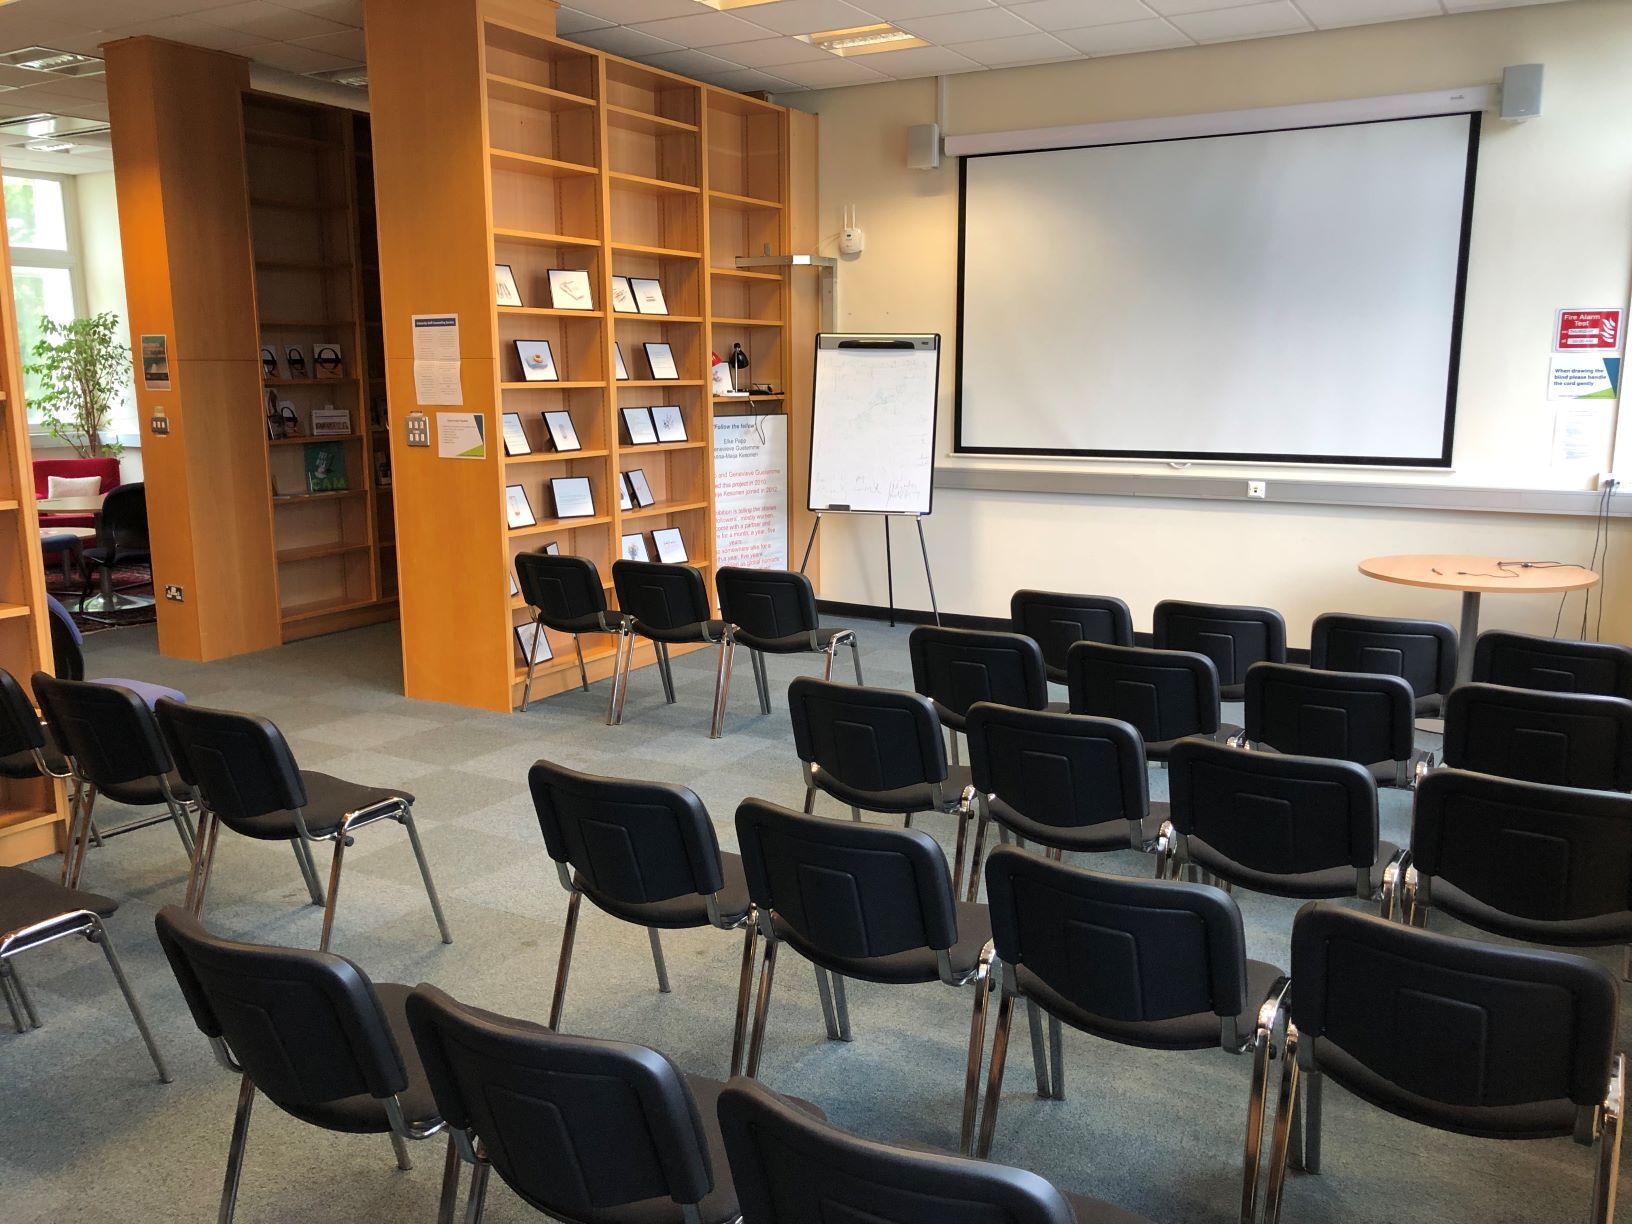 Photograph showing the lecture-style layout of the Newman Library - a room with five rows of chairs facing a projector screen on the end wall.